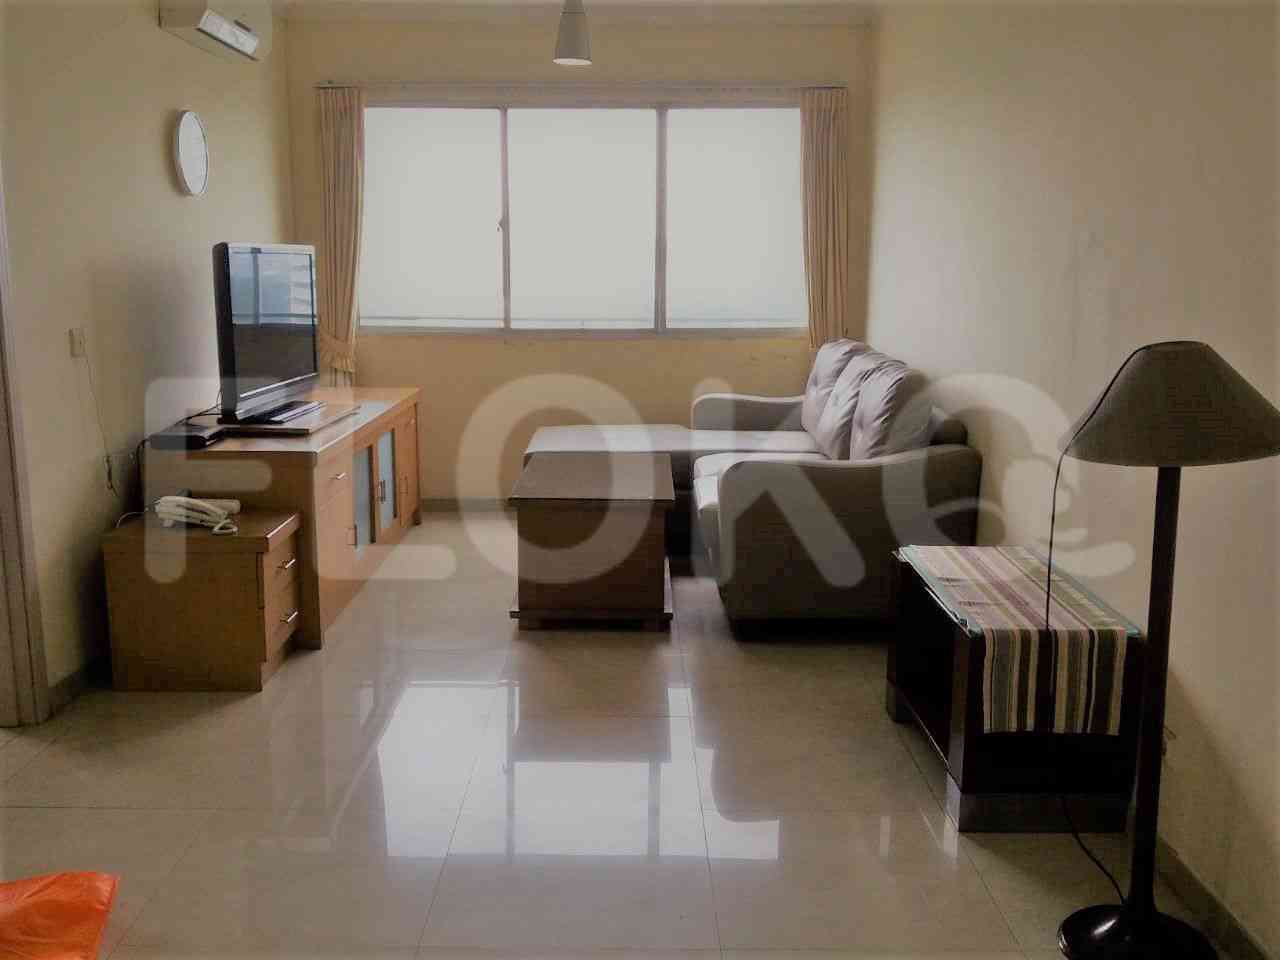 2 Bedroom on 18th Floor for Rent in Permata Senayan Apartment - fpafc3 2